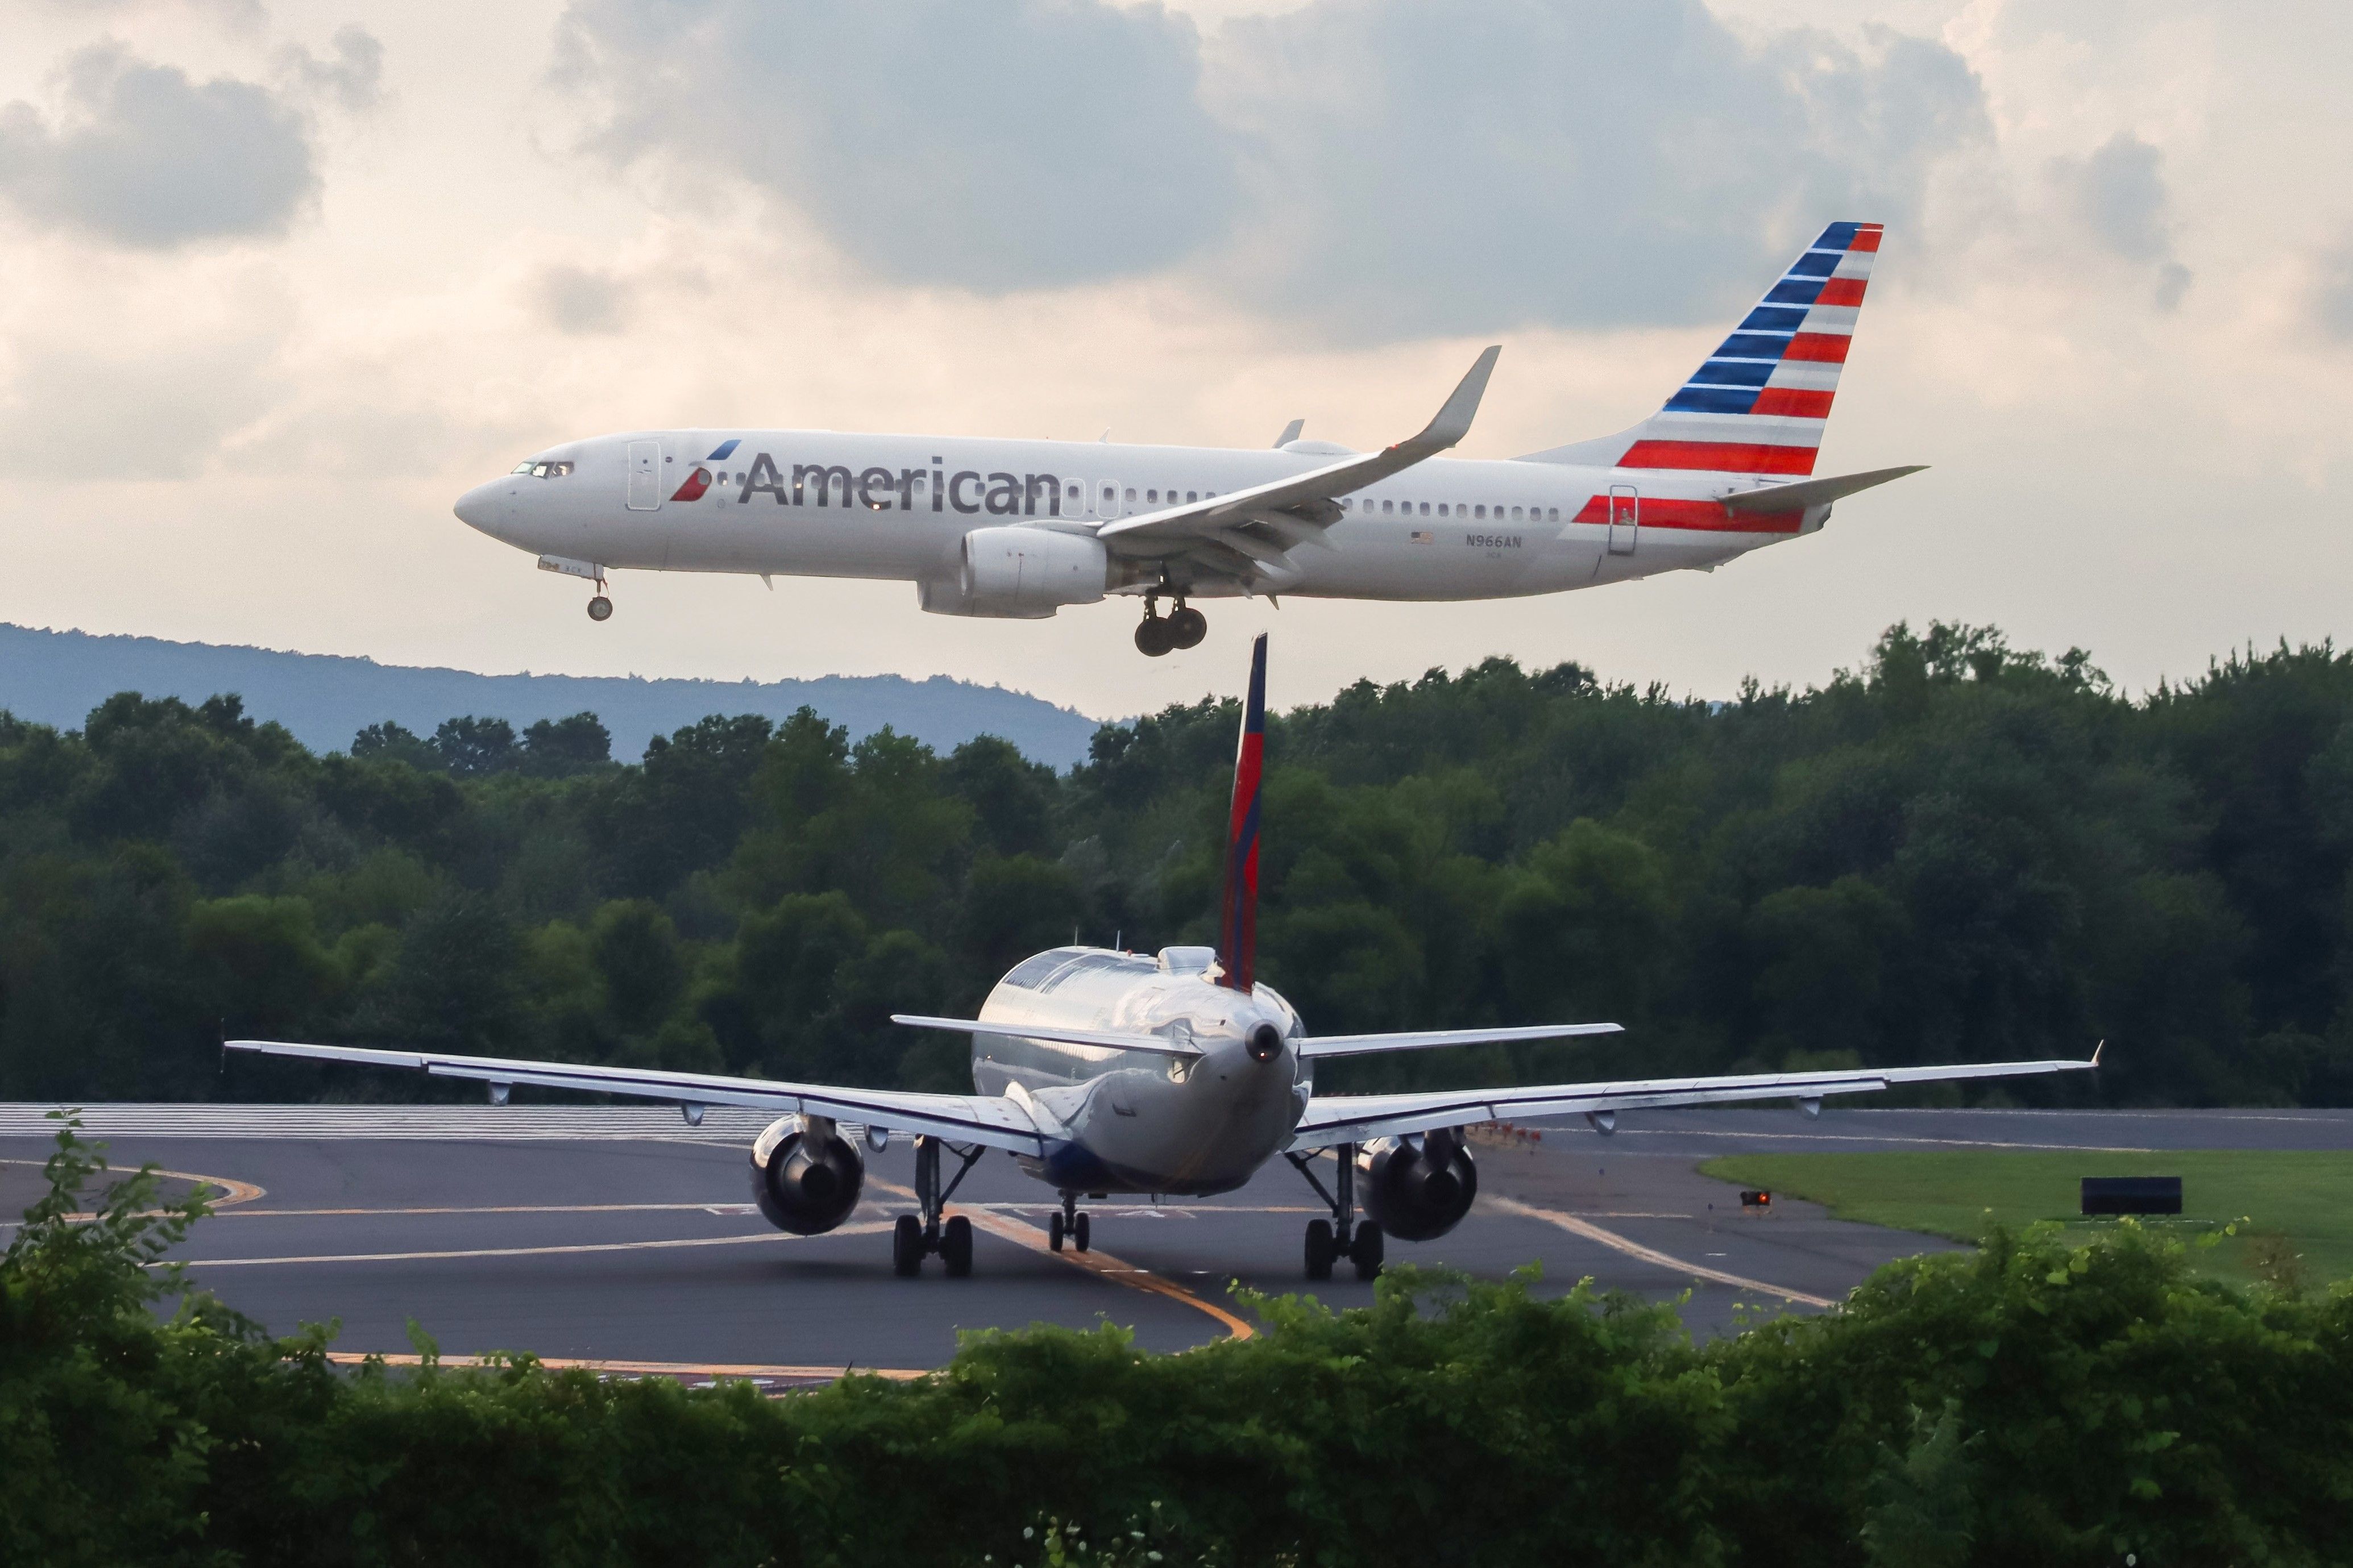 An American Airlines Boeing 737 Landing While A Delta Air Lines Aircraft Waits on the Apron.